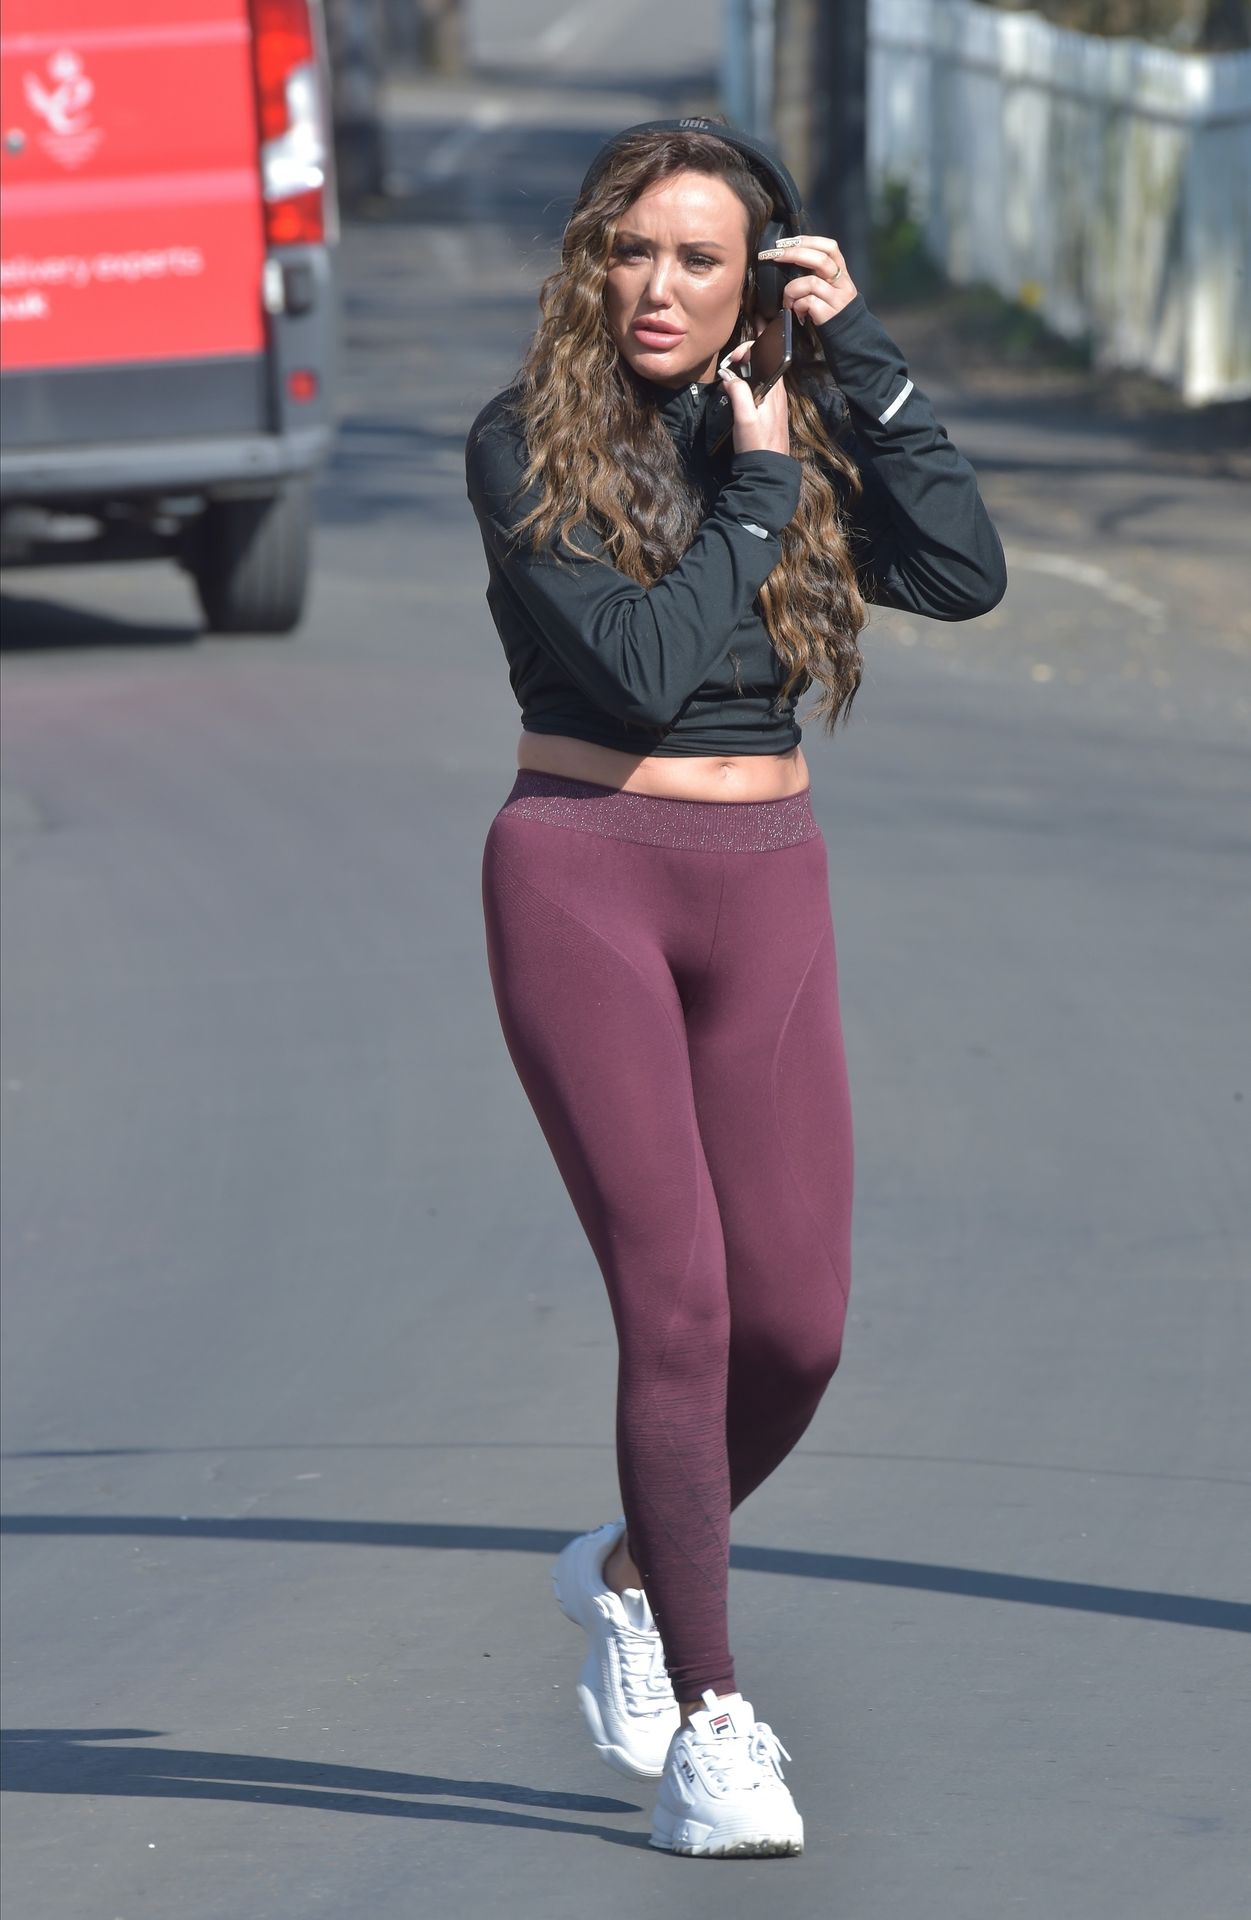 Charlotte Crosby Pictured While Jogging 0009